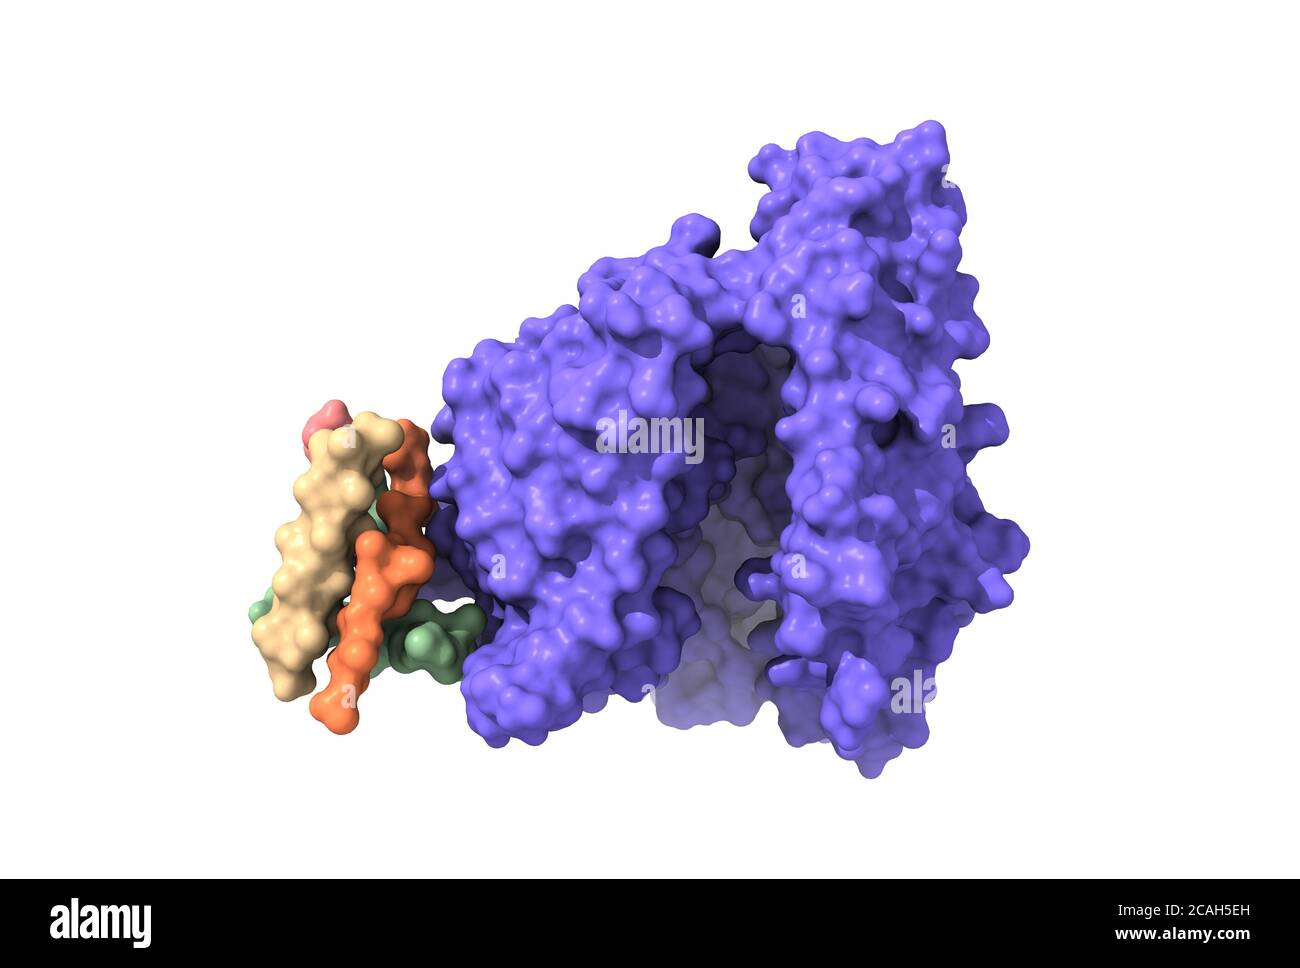 Structure of the human Angiotensin Converting Enzyme-Related Carboxypeptidase (ACE2), a receptor of SARS-CoV-2 spike glycoprotein, 3D surface model Stock Photo